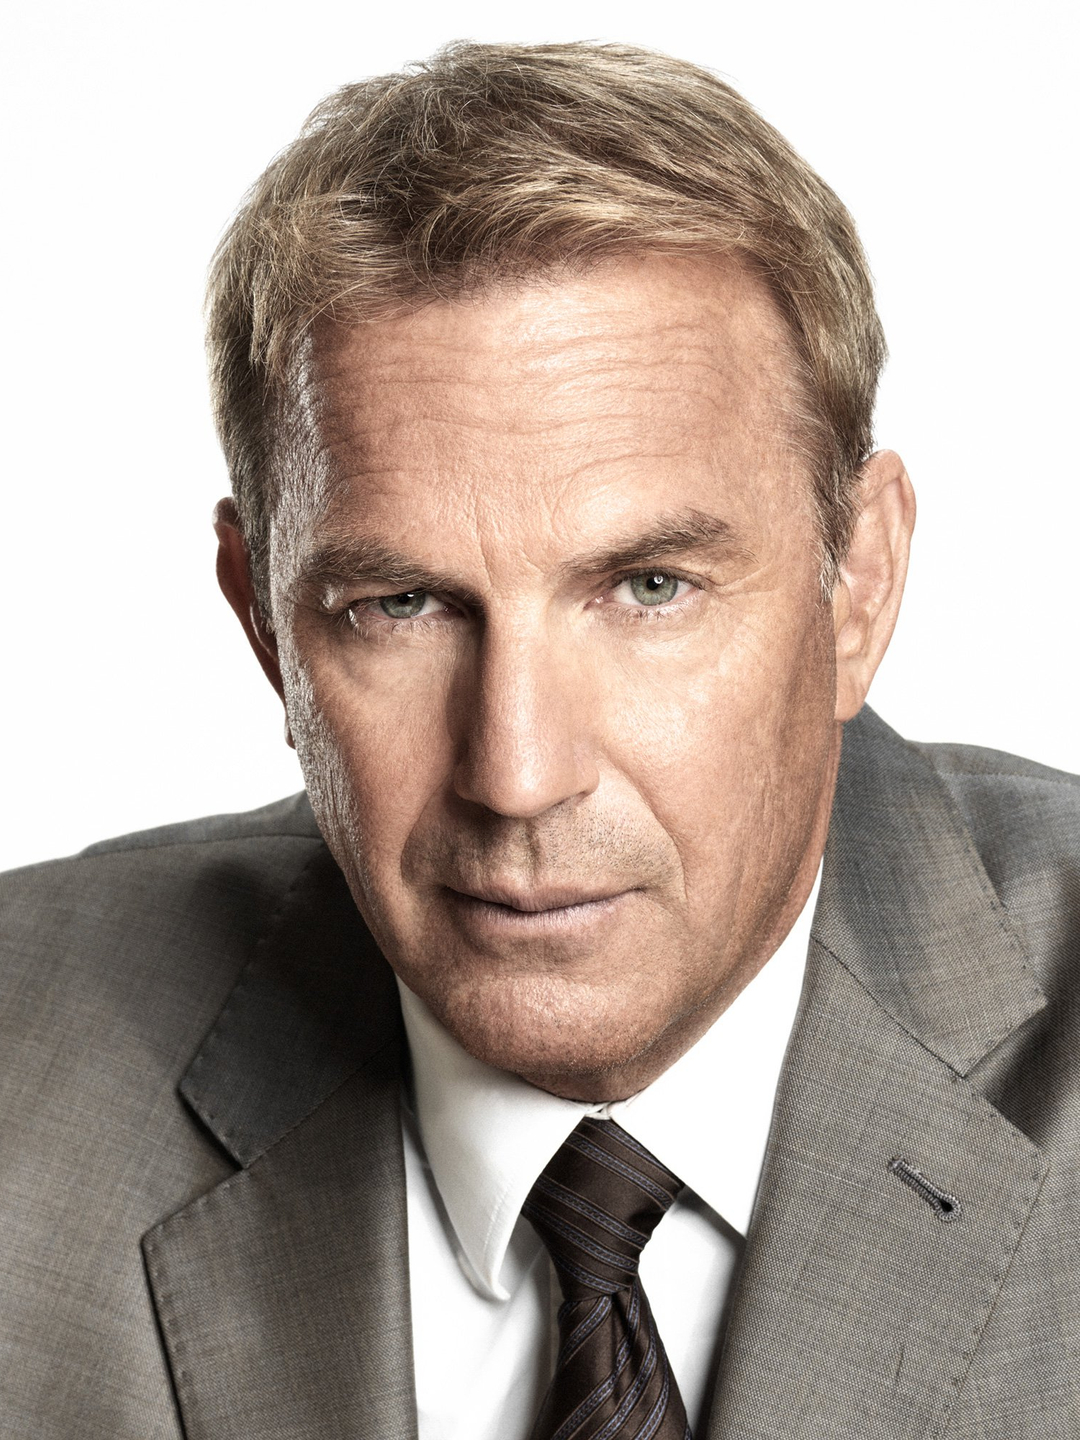 Kevin Costner main achievements